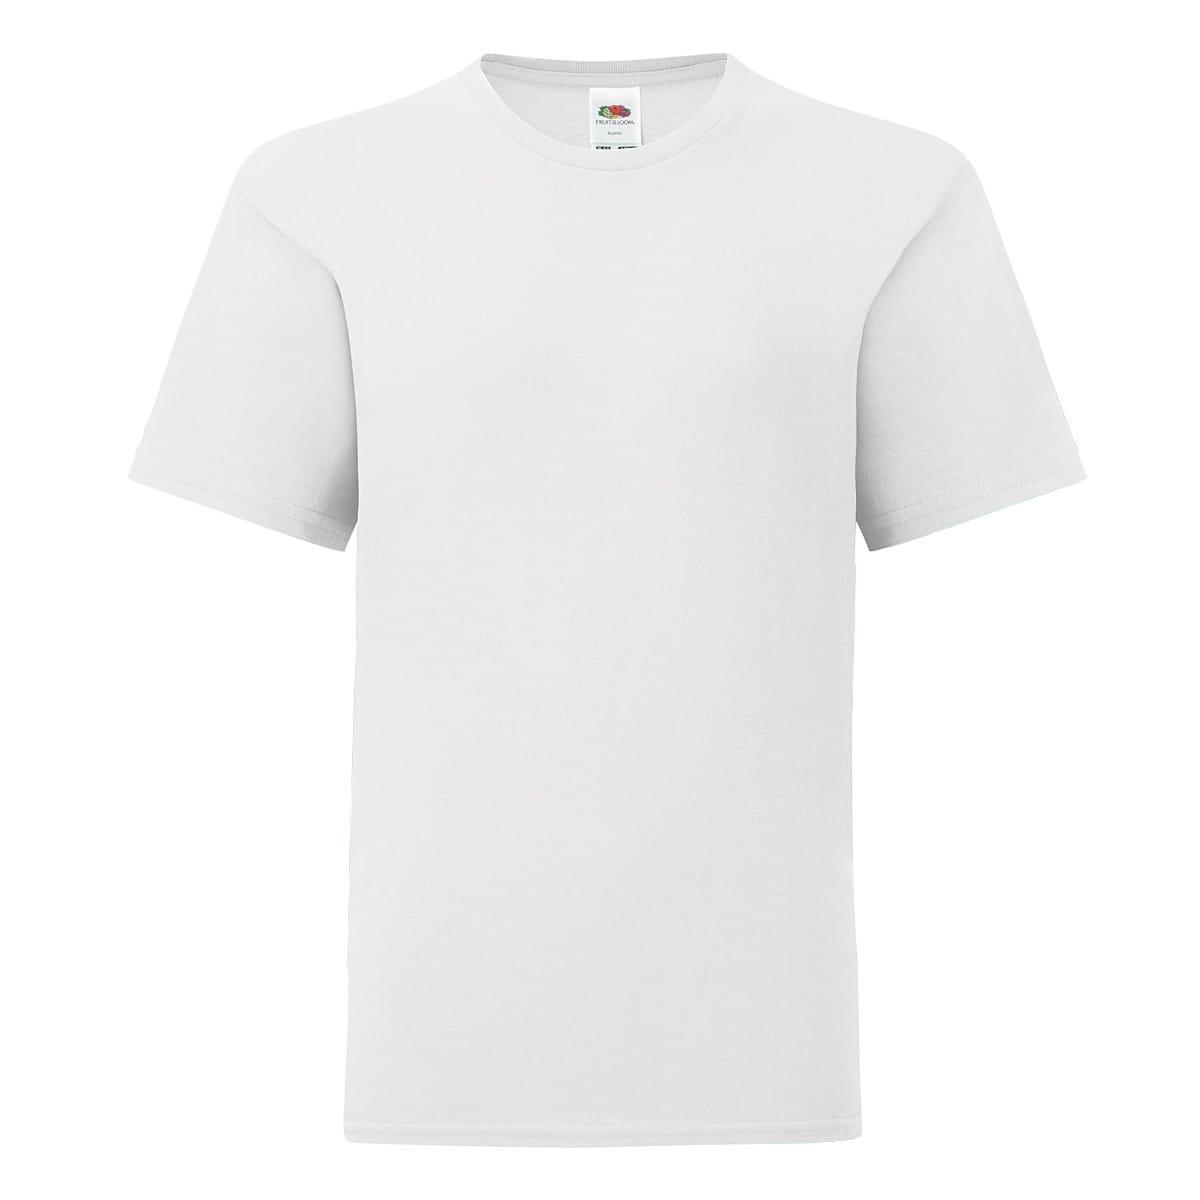 Fruit Of The Loom Kids Iconic T-Shirt in White (Product Code: 61023)